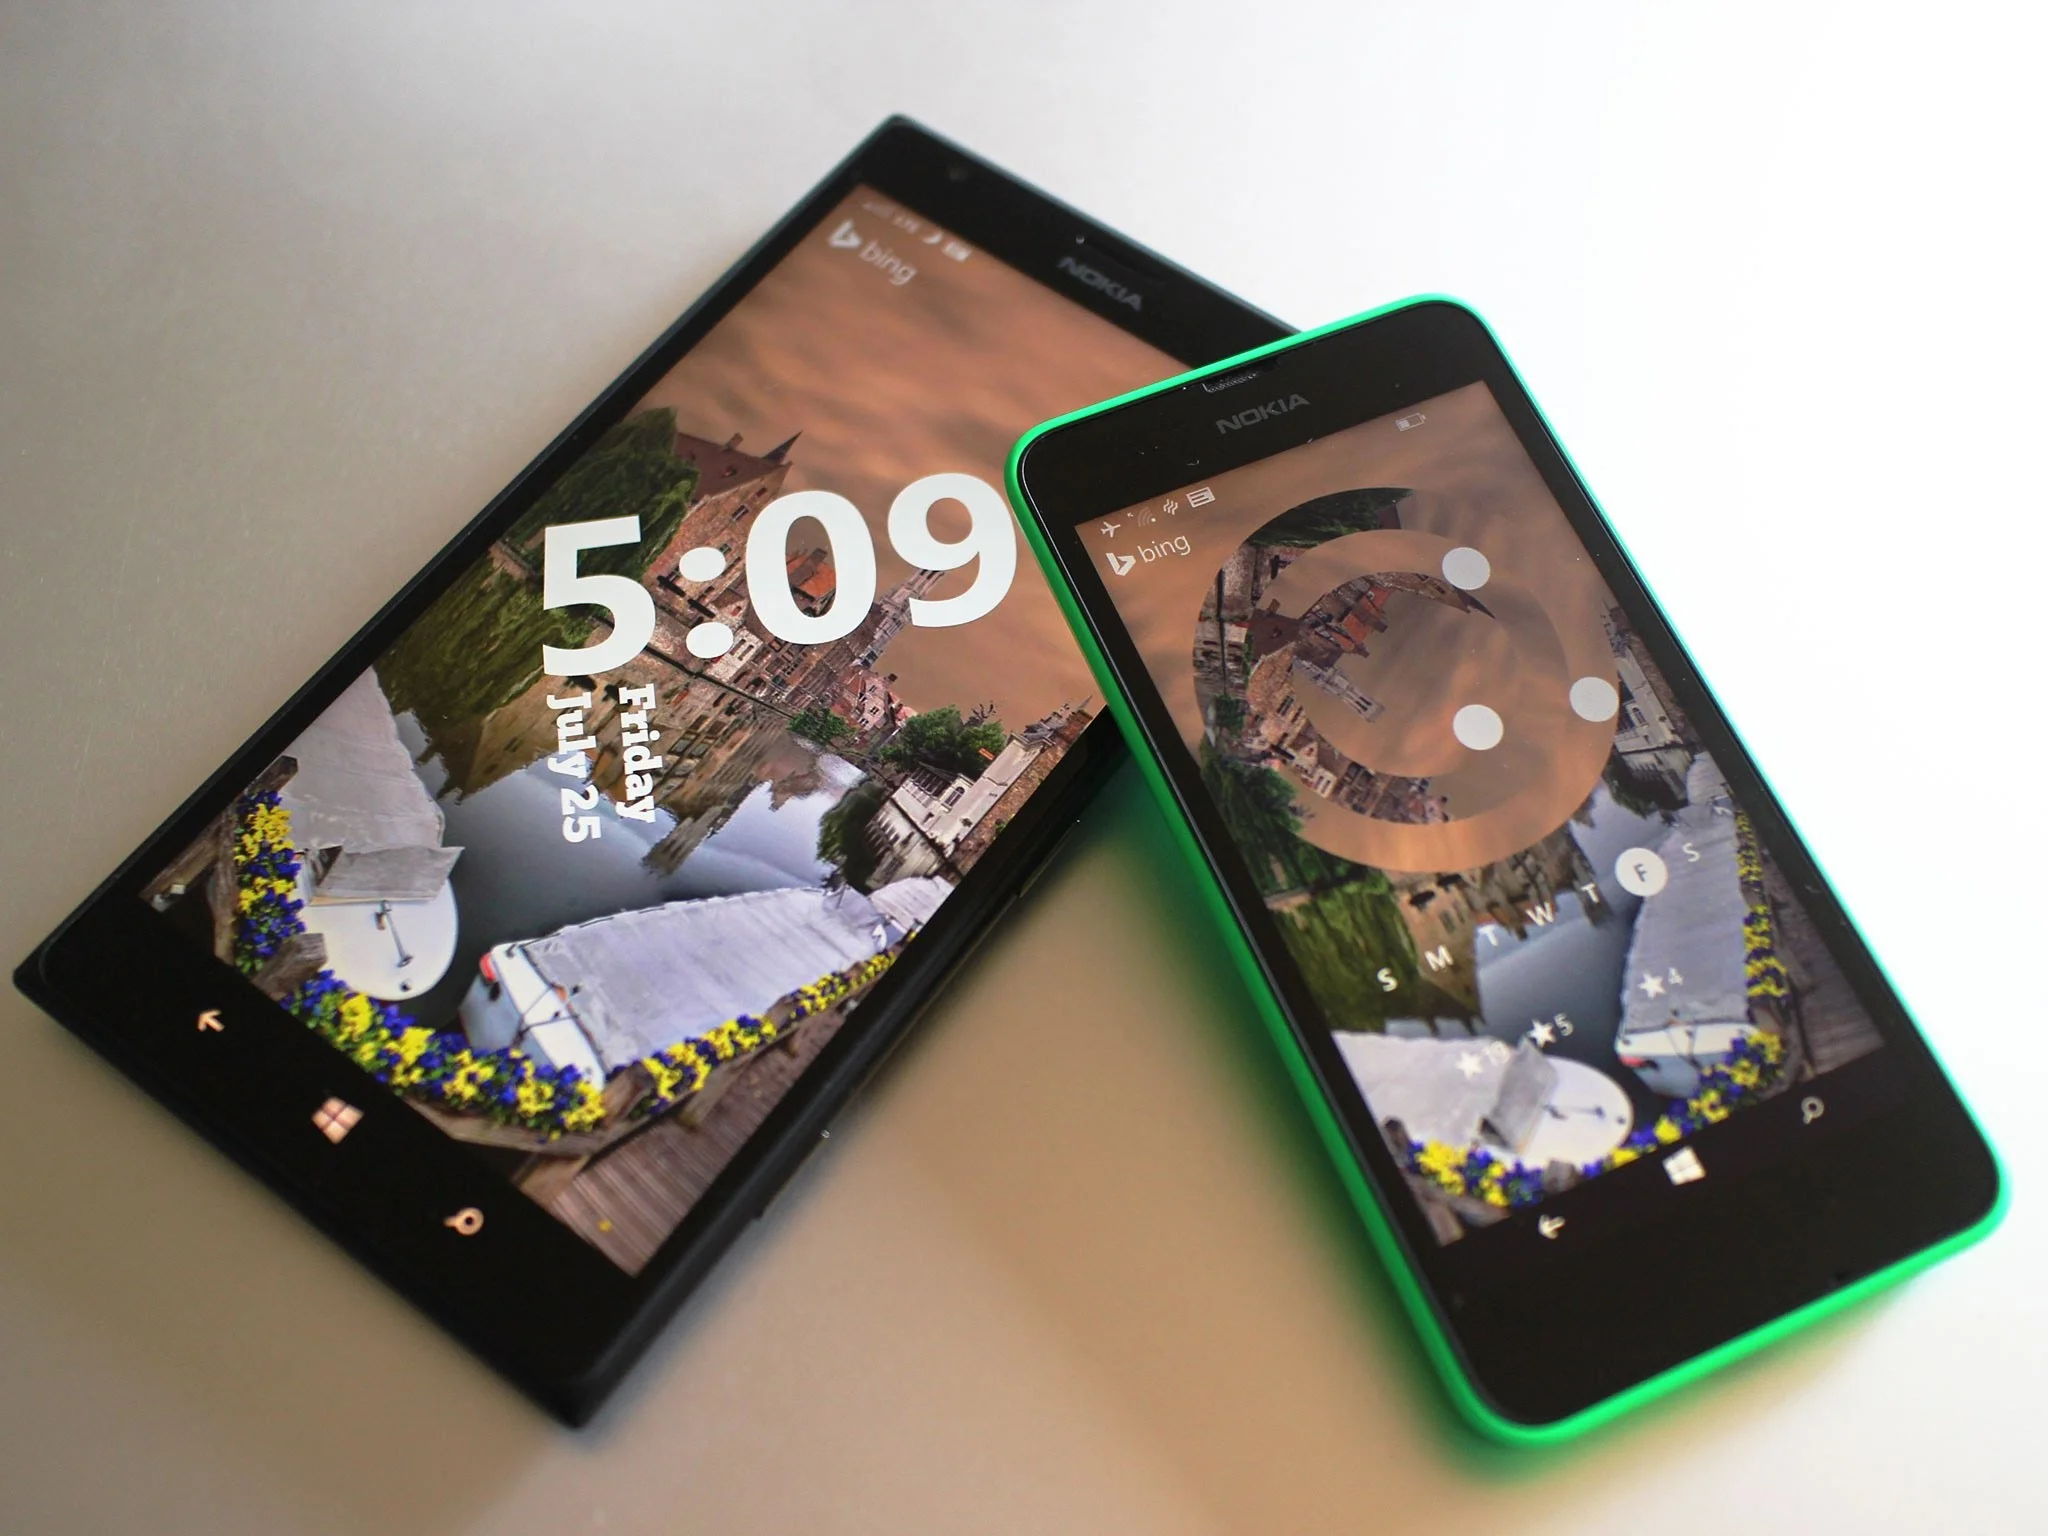 Hands-on with the new Live Lock Screen app for Windows Phone 8.1 – YouTube